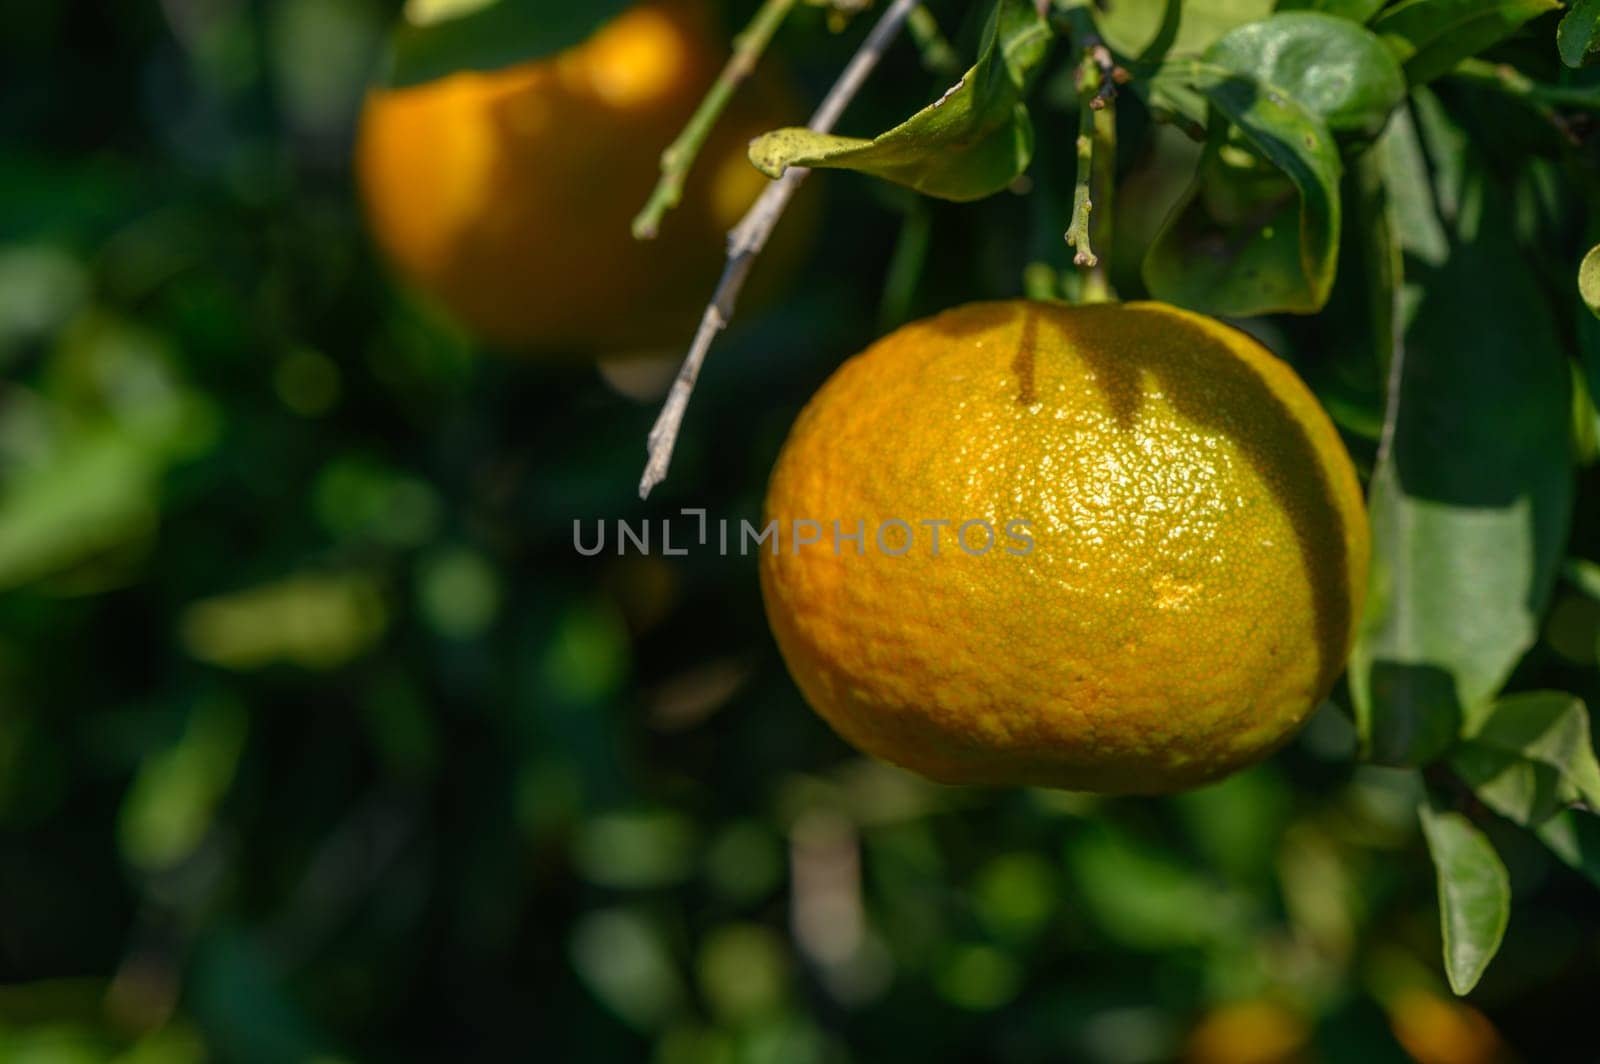 juicy tangerines on tree branches in autumn in Cyprus 1 by Mixa74